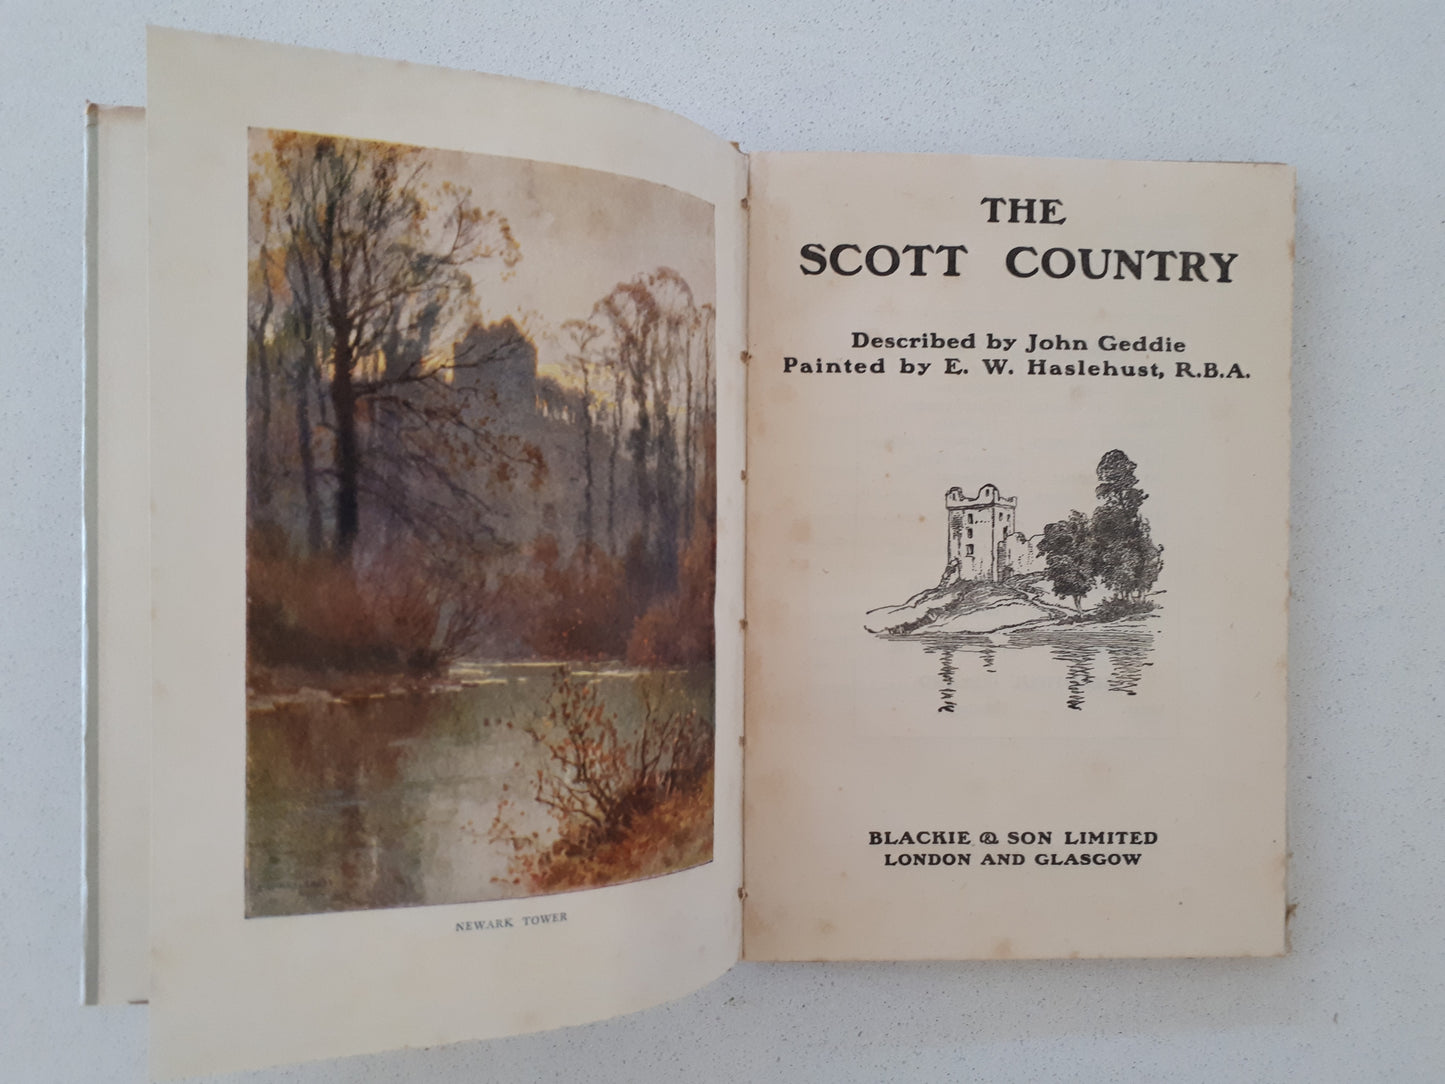 The Scott Country described by John Geddie